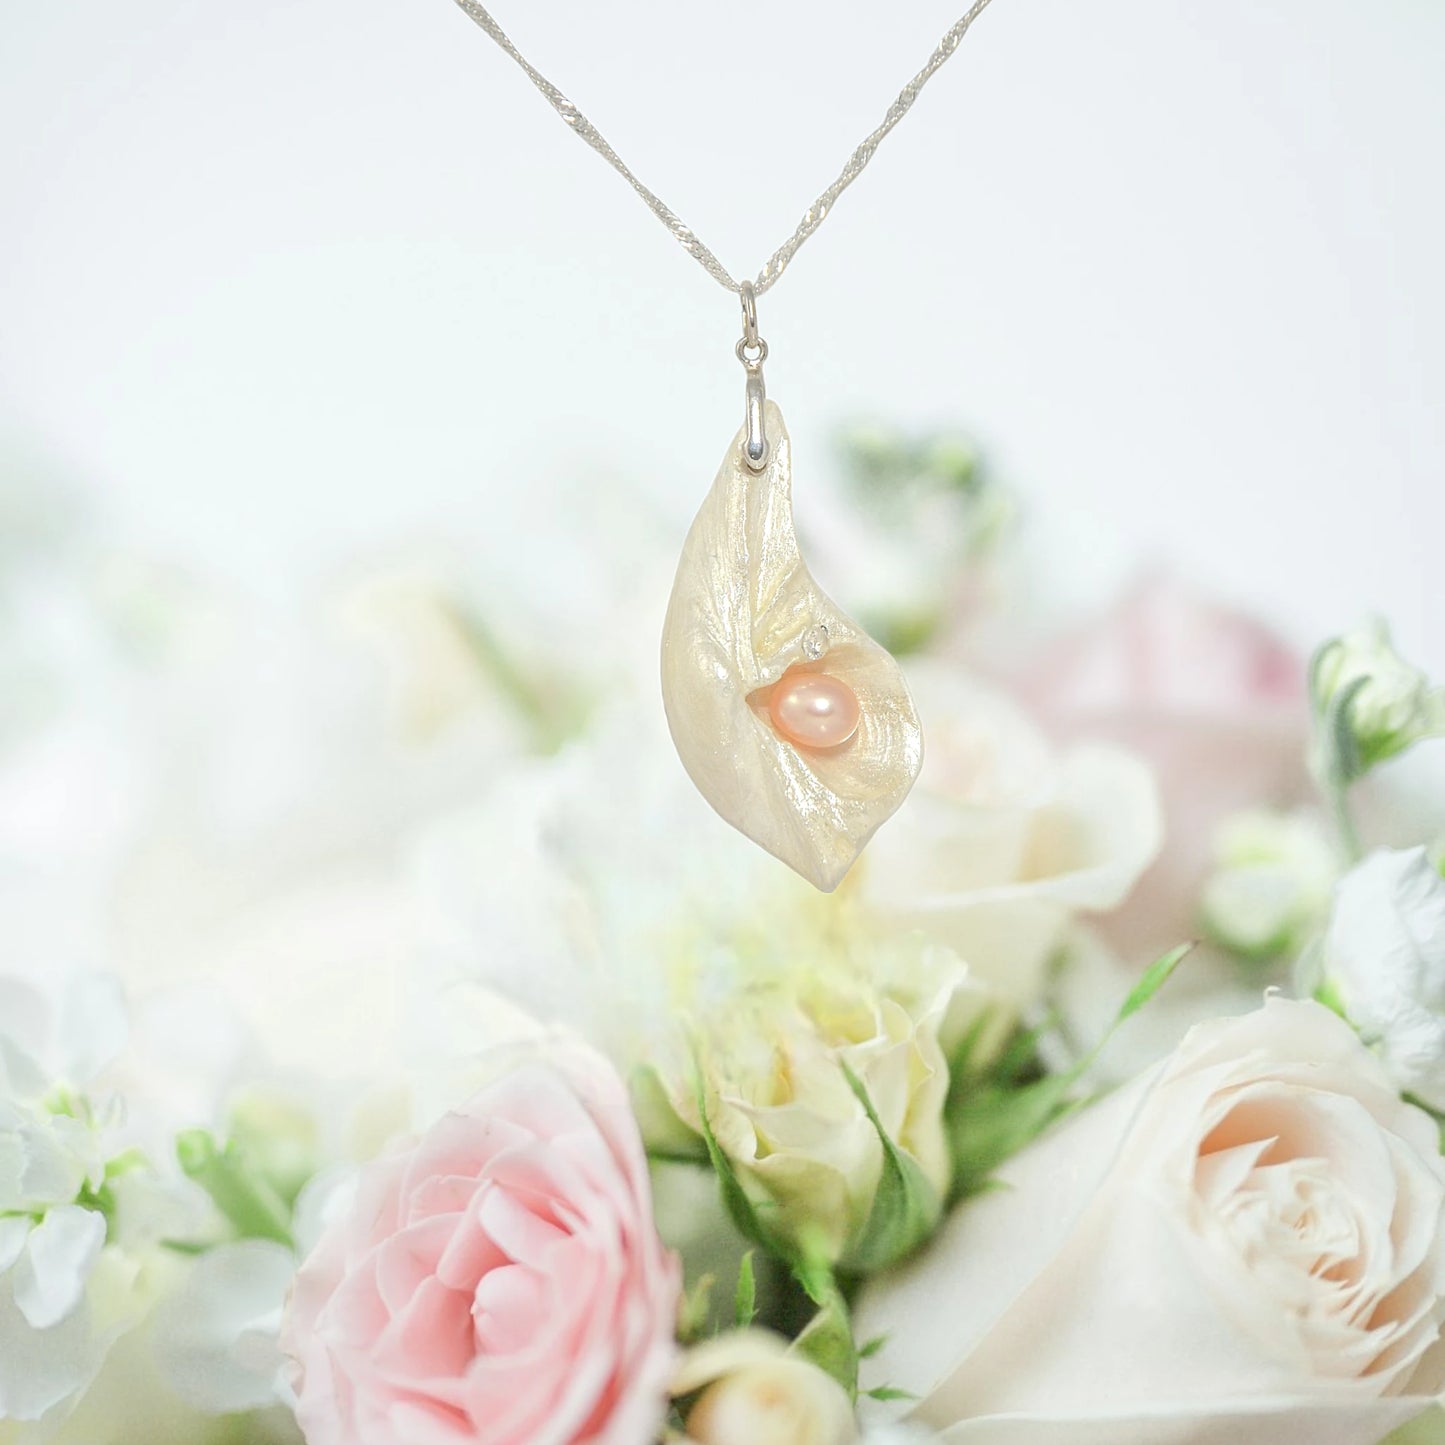 Athena is the name of the pendant being showcased.  It is a natural seashell from the beaches of Vancouver Island. The pendant has a real pink freshwater pearl and a faceted herkimer diamond. The pendant is hanging over a bouquet of pink and white roses.